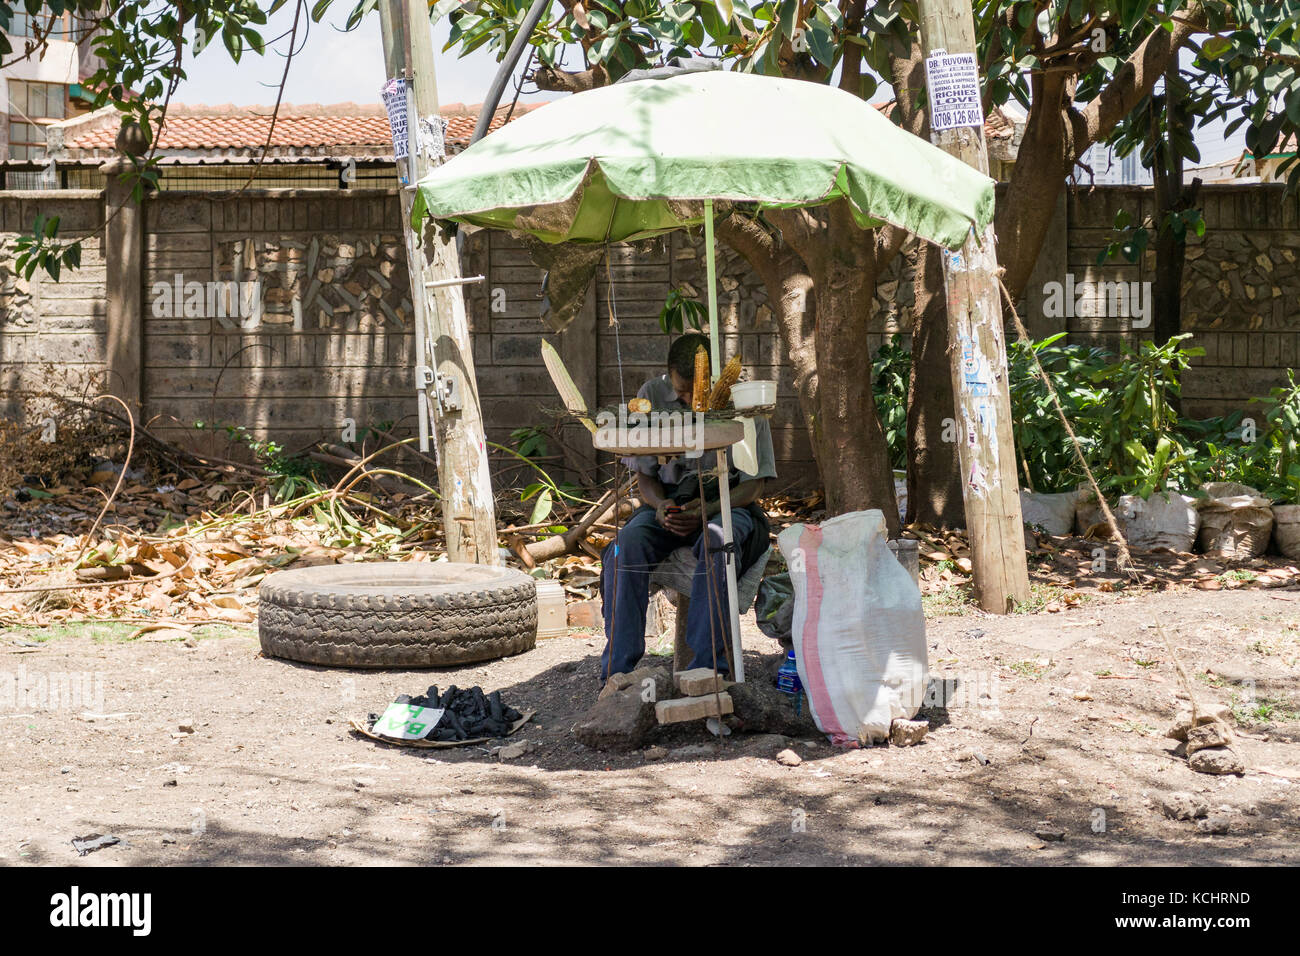 Man sitting in shade under parasol selling cooked maize on pavement by road, Nairobi, Kenya Stock Photo